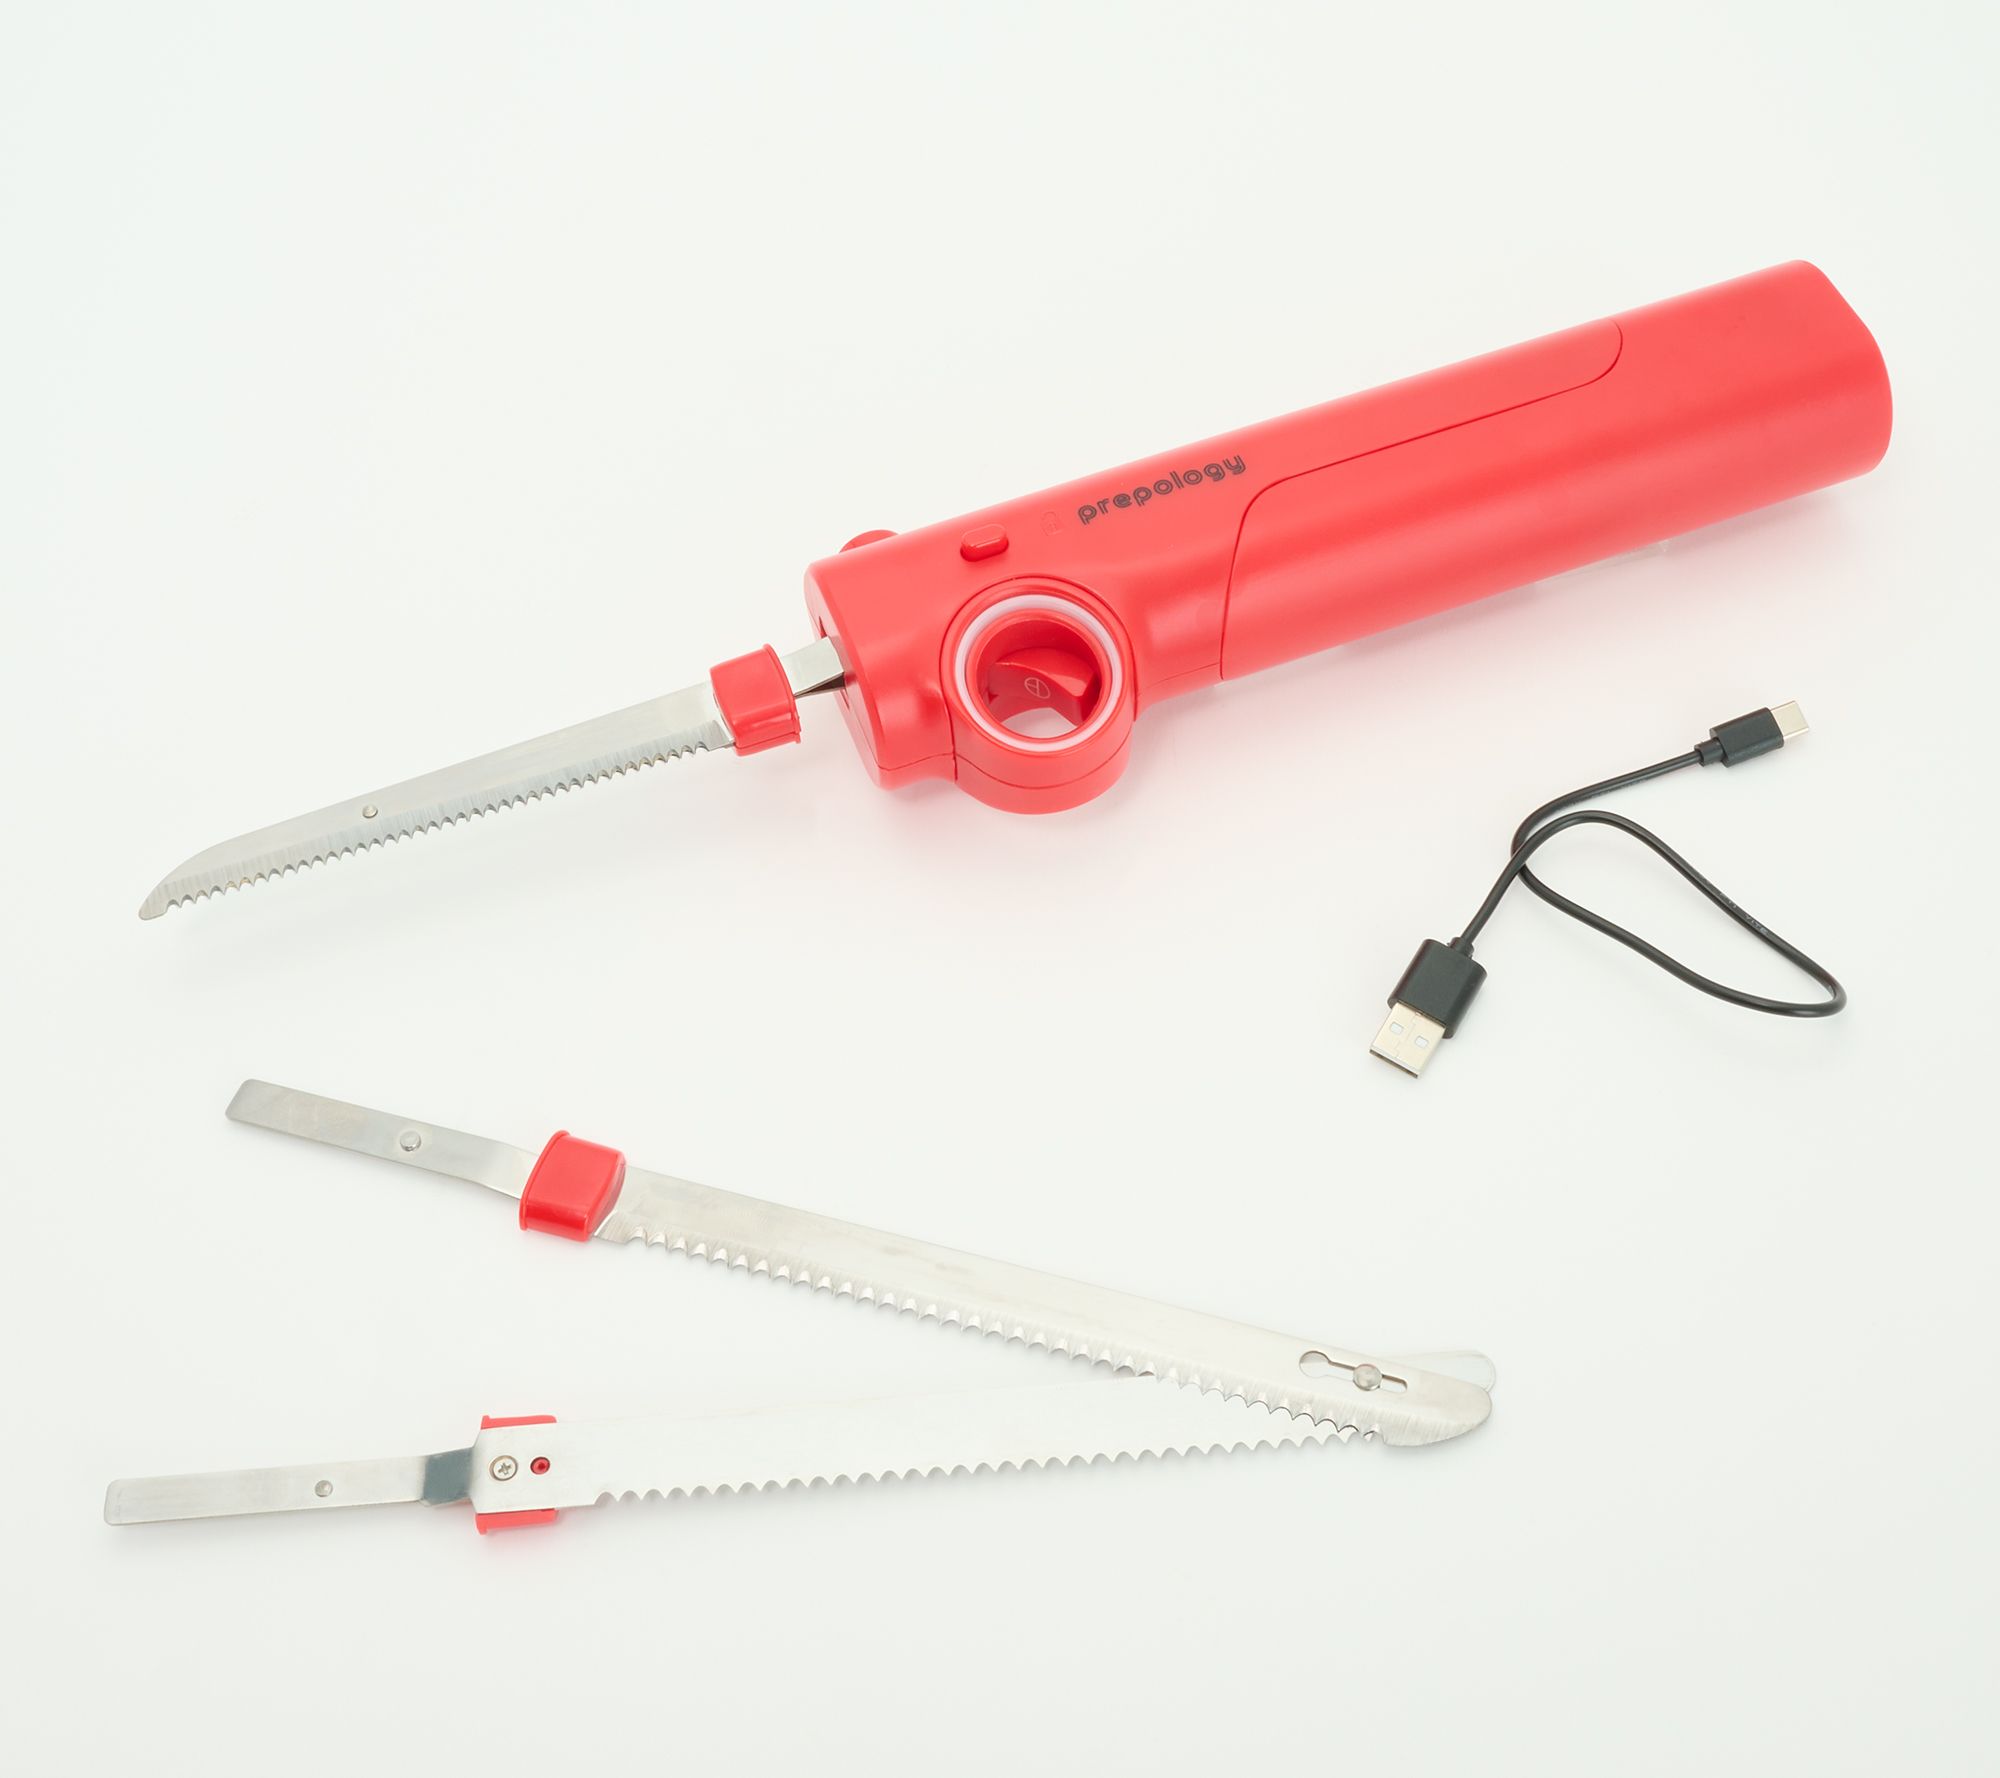 Prepology Rechargeable Electric Knife 